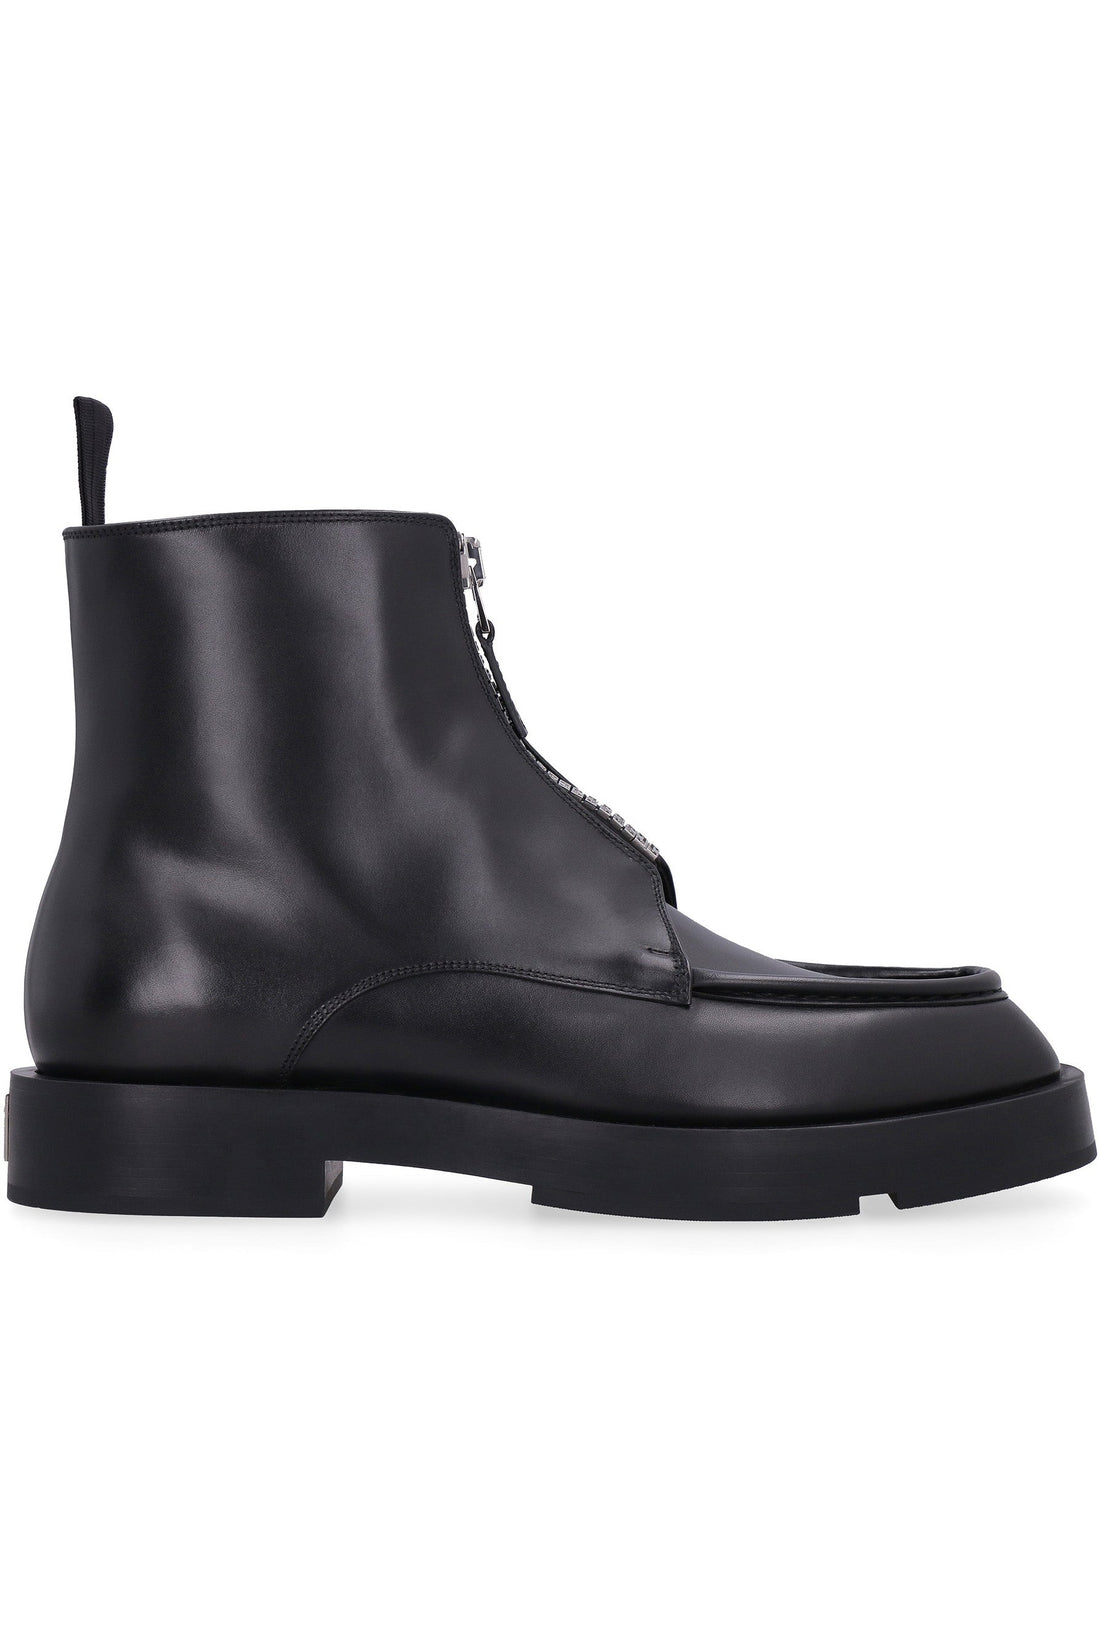 Givenchy-OUTLET-SALE-Squared leather ankle boots-ARCHIVIST